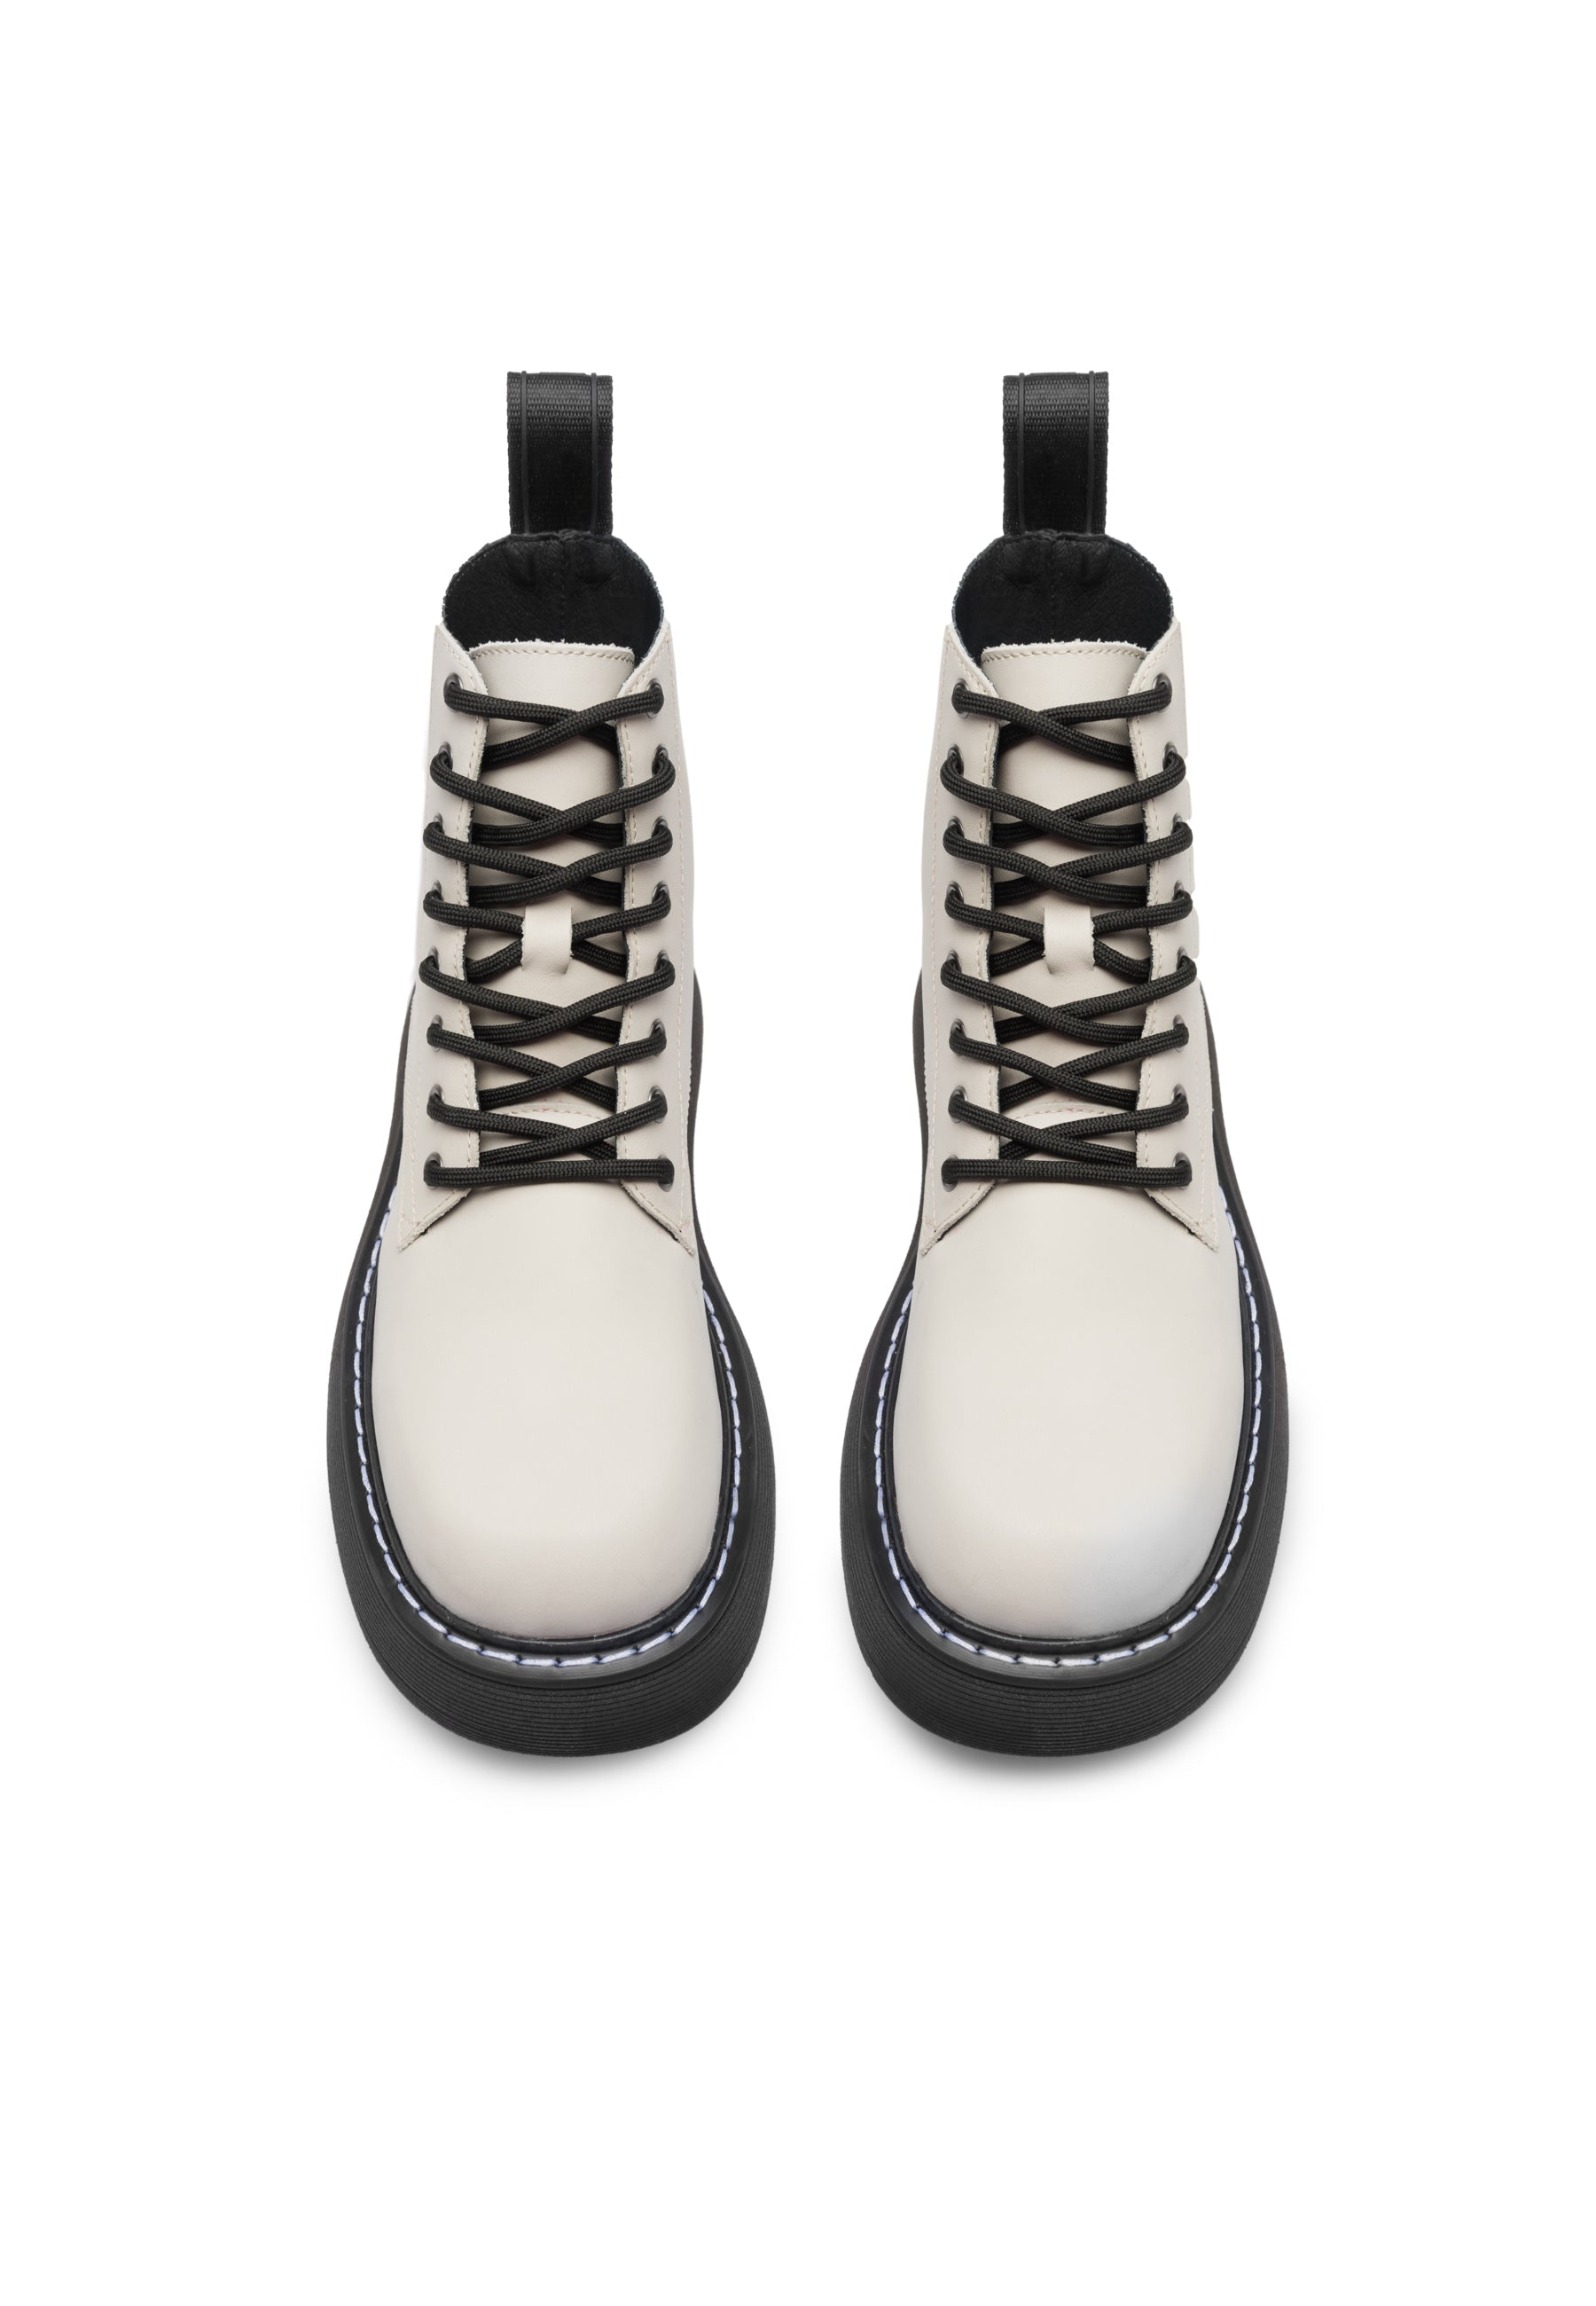 Jane Off White Leather Combat Boots LAST1688 -4